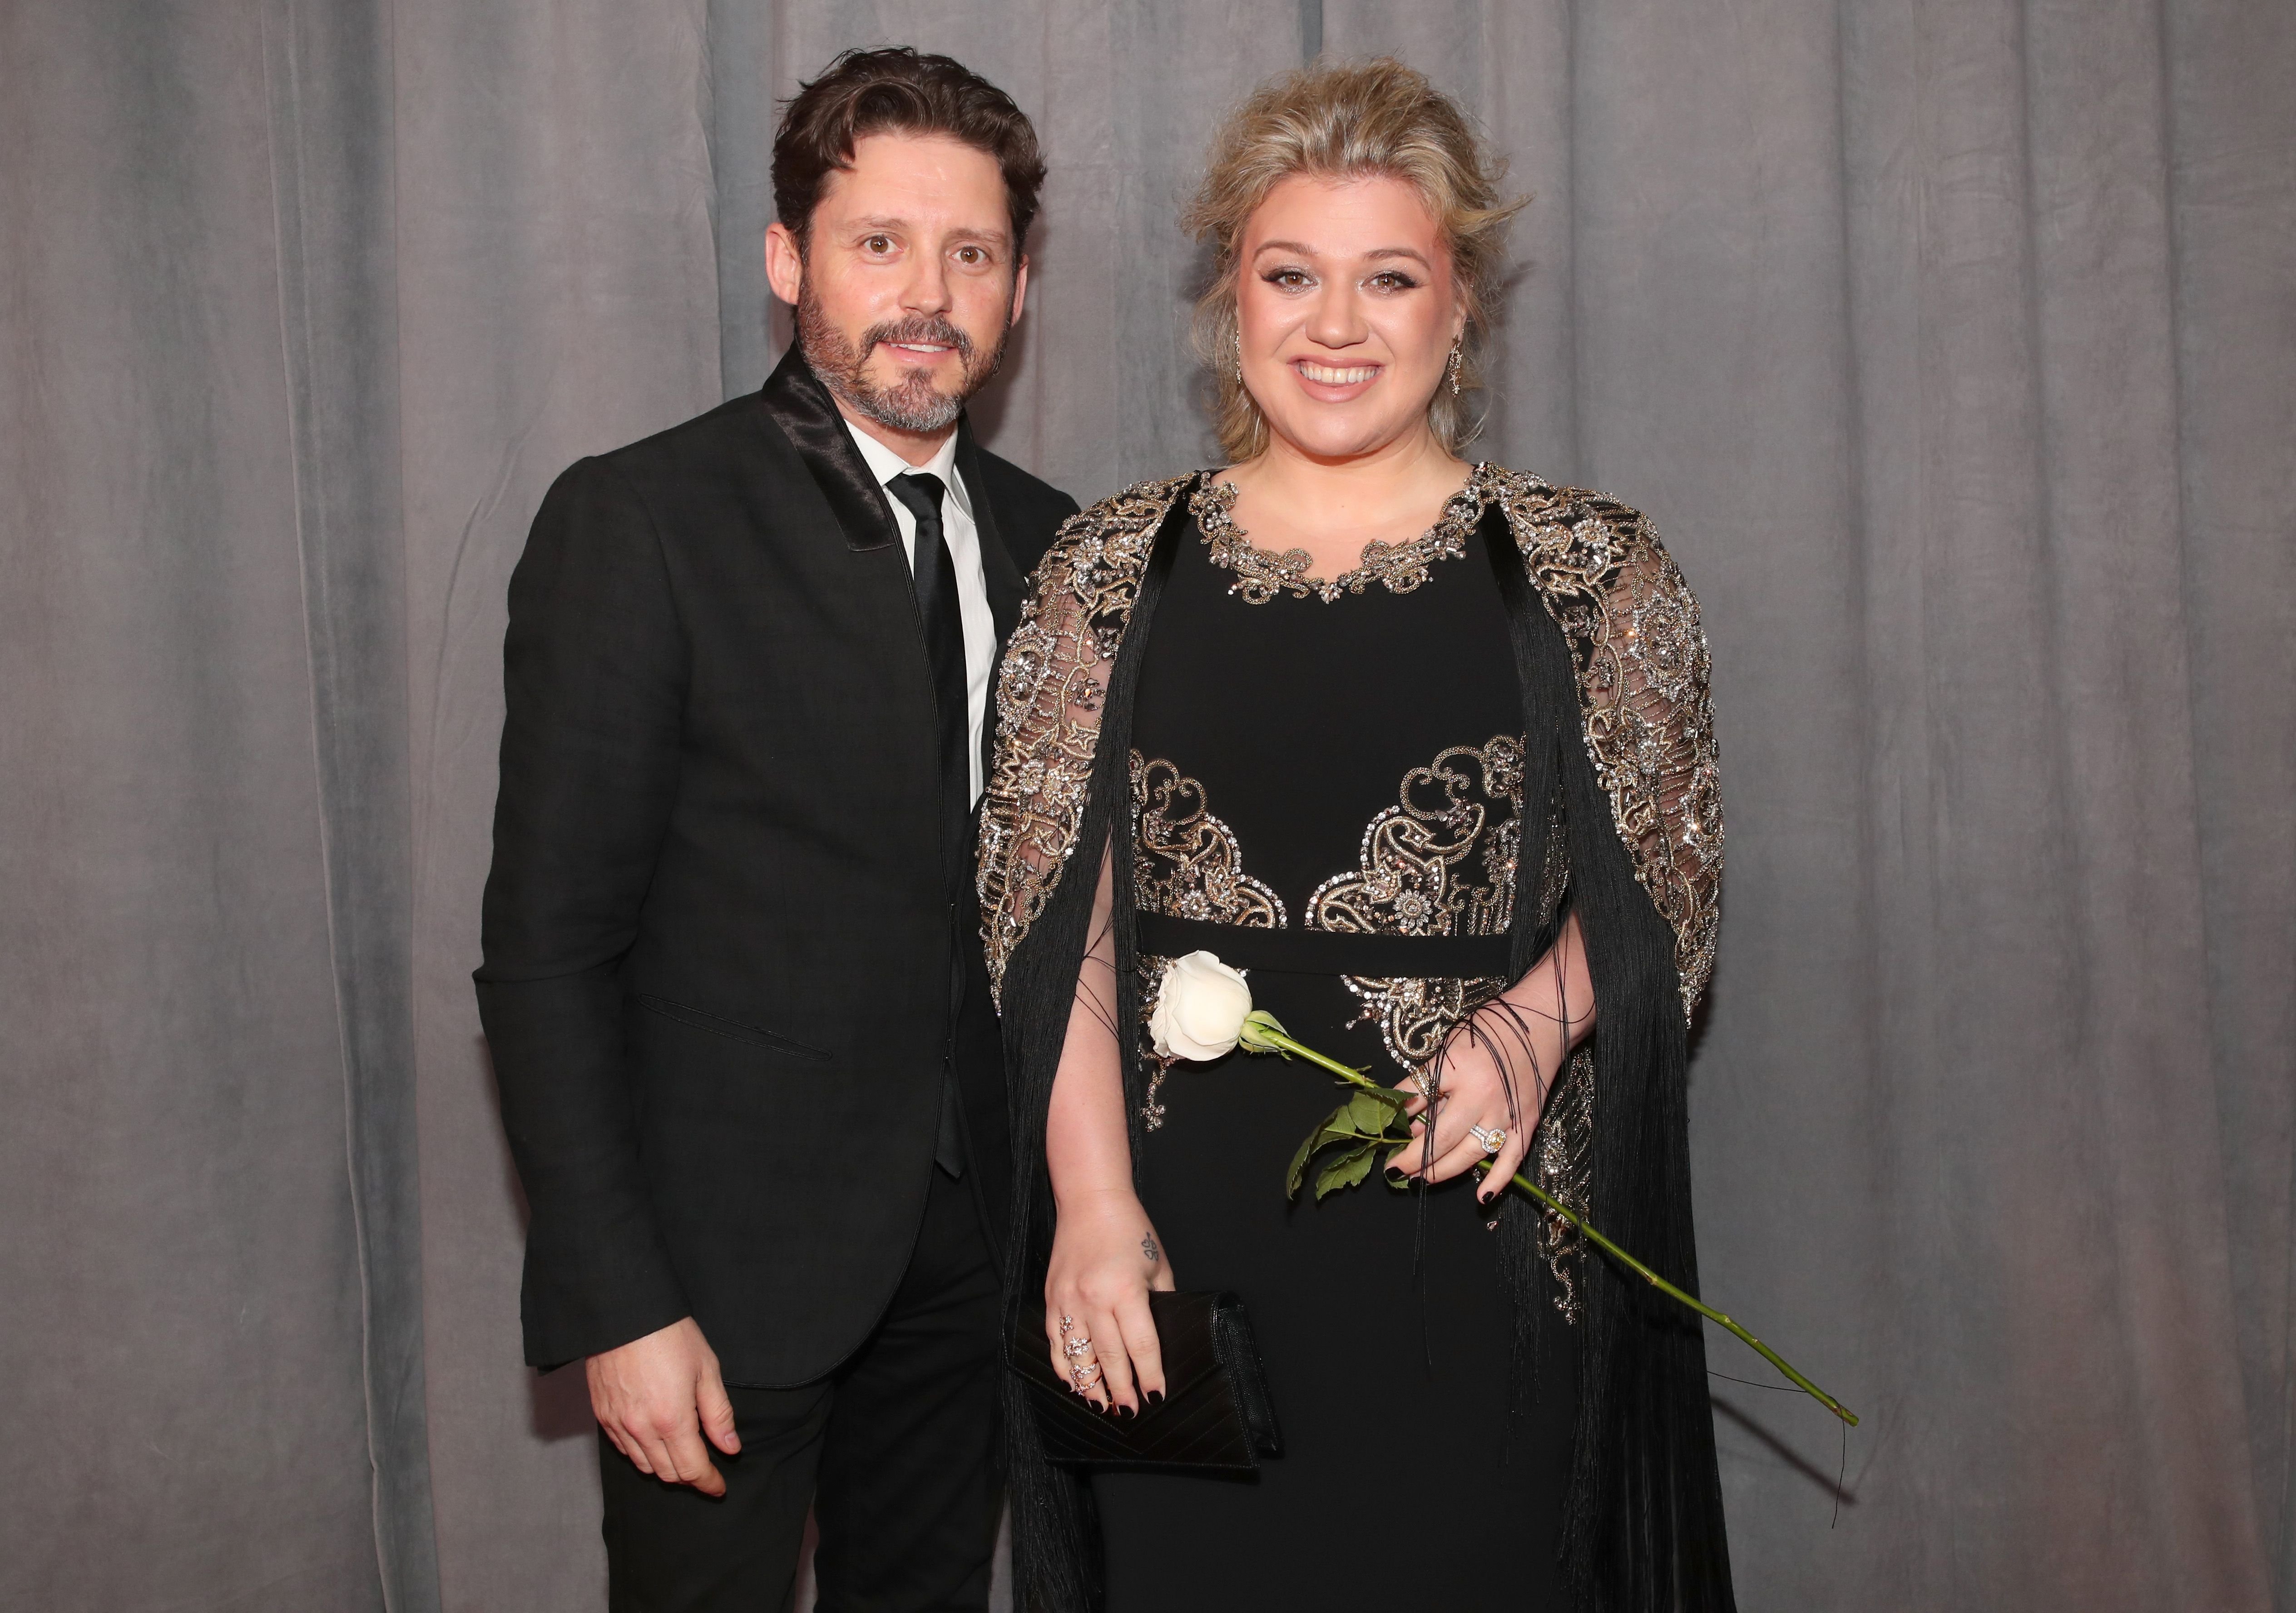 Brandon Blackstock and recording artist Kelly Clarkson at the 60th Annual GRAMMY Awards at Madison Square Garden on January 28, 2018 | Photo: Getty Images